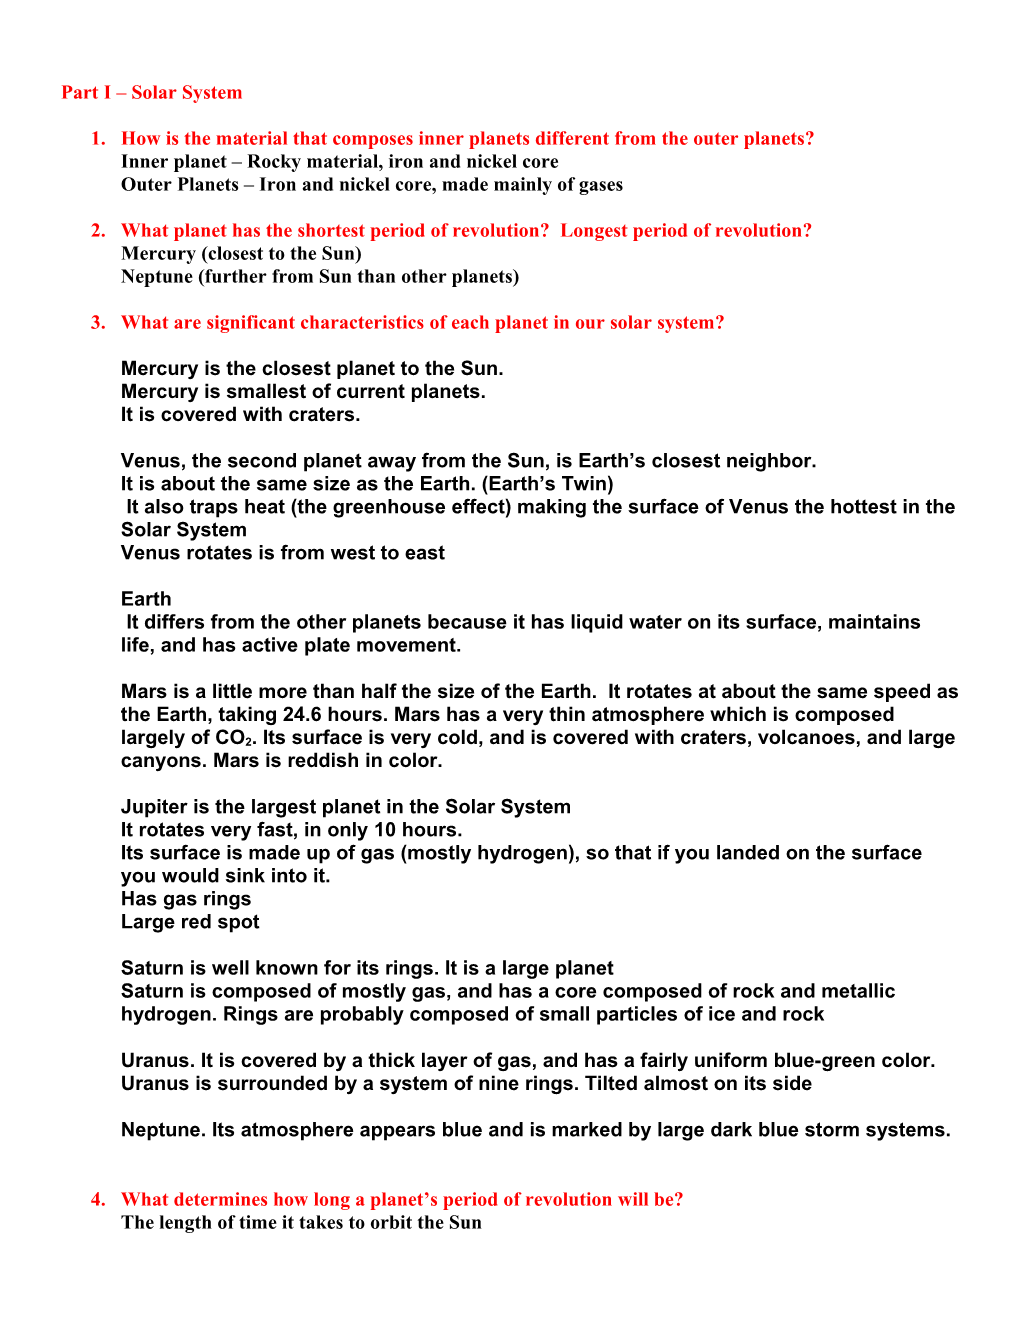 Study Guide: Use Your Notes and Handouts to Answer the Following Questions